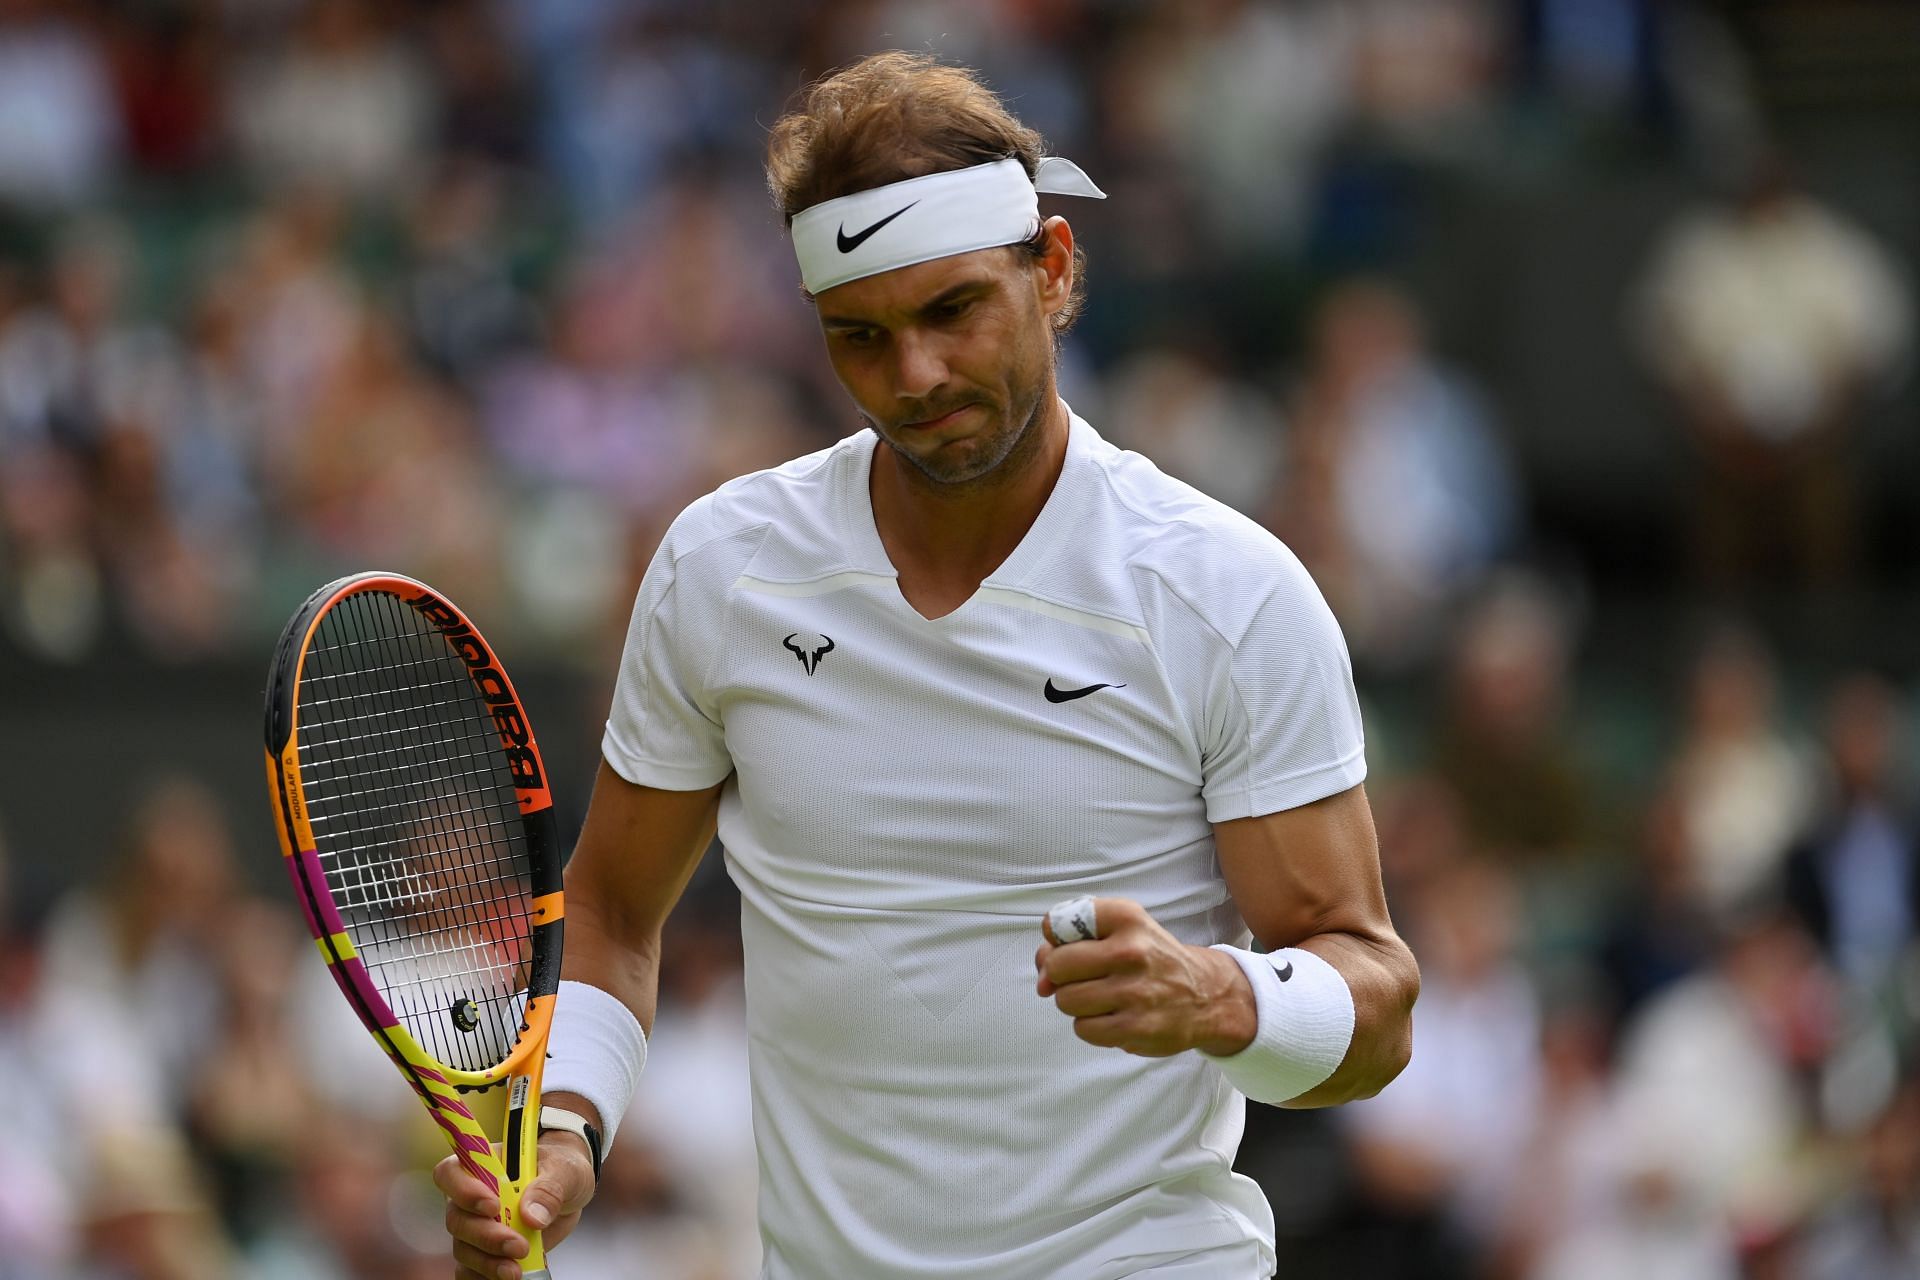 Wimbledon 2022 TV Schedule When are Rafael Nadal, Nick Kyrgios and Simona Halep playing?